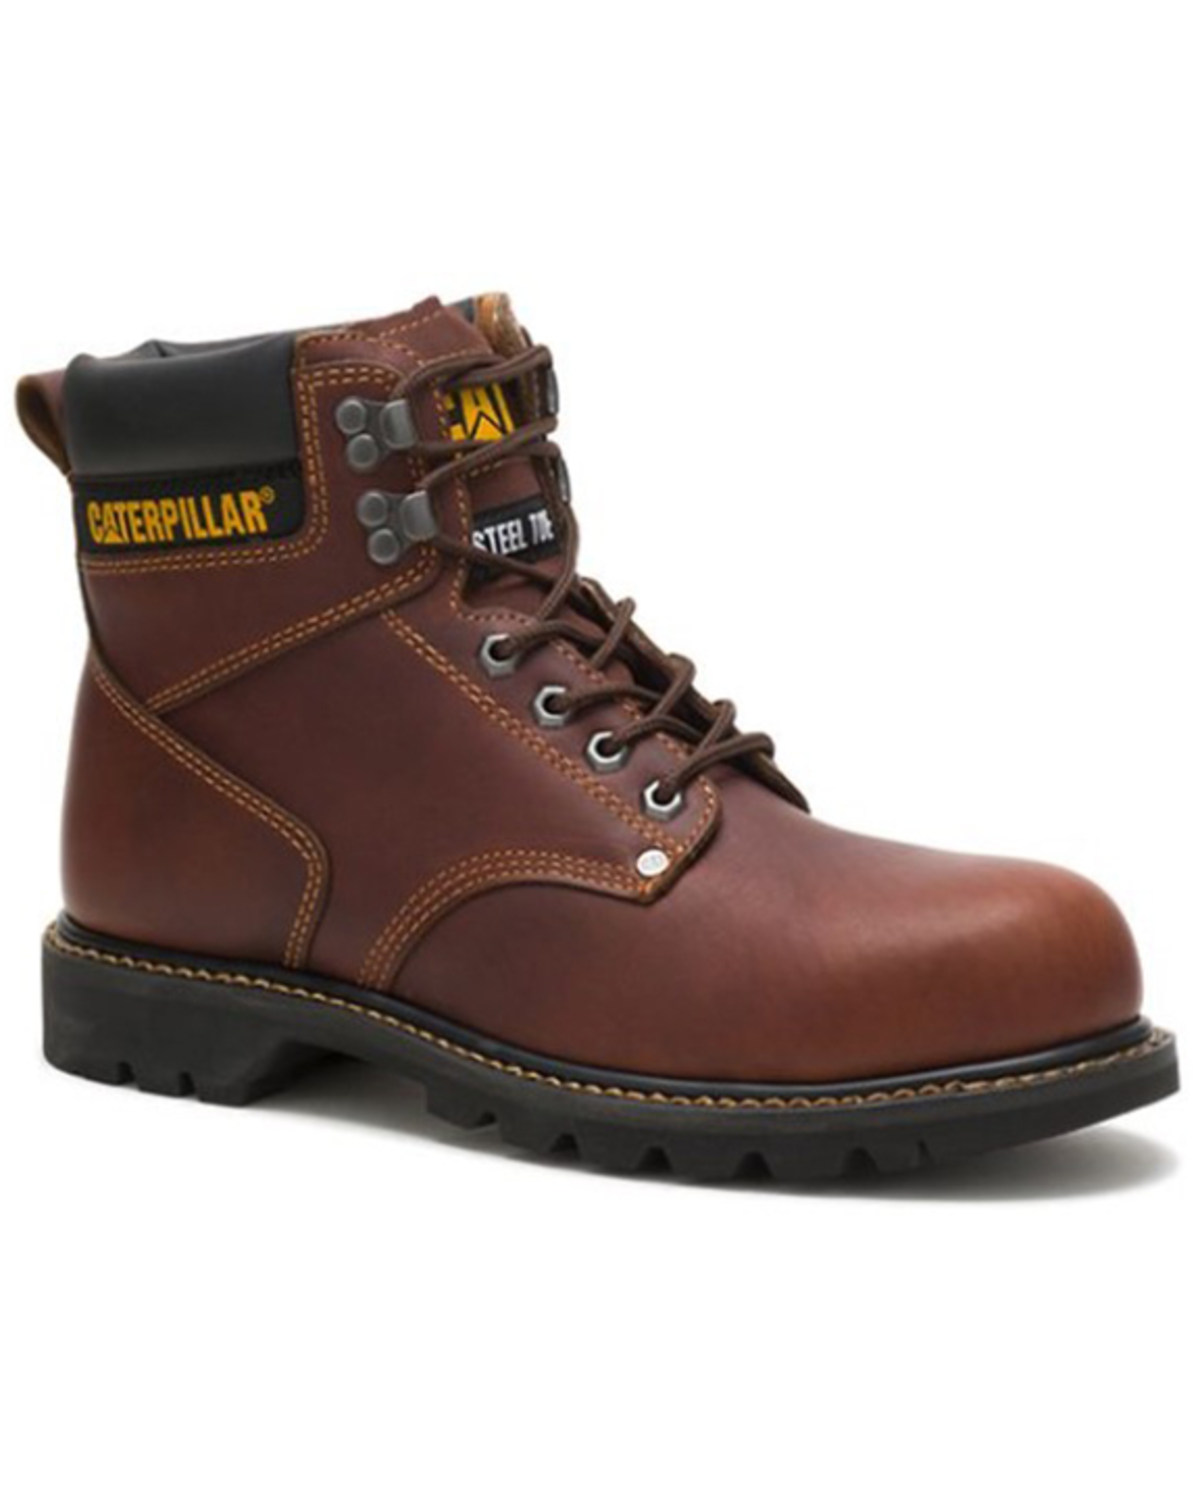 Caterpillar Men's 6" Second Shift Lace-Up Work Boots - Steel Toe